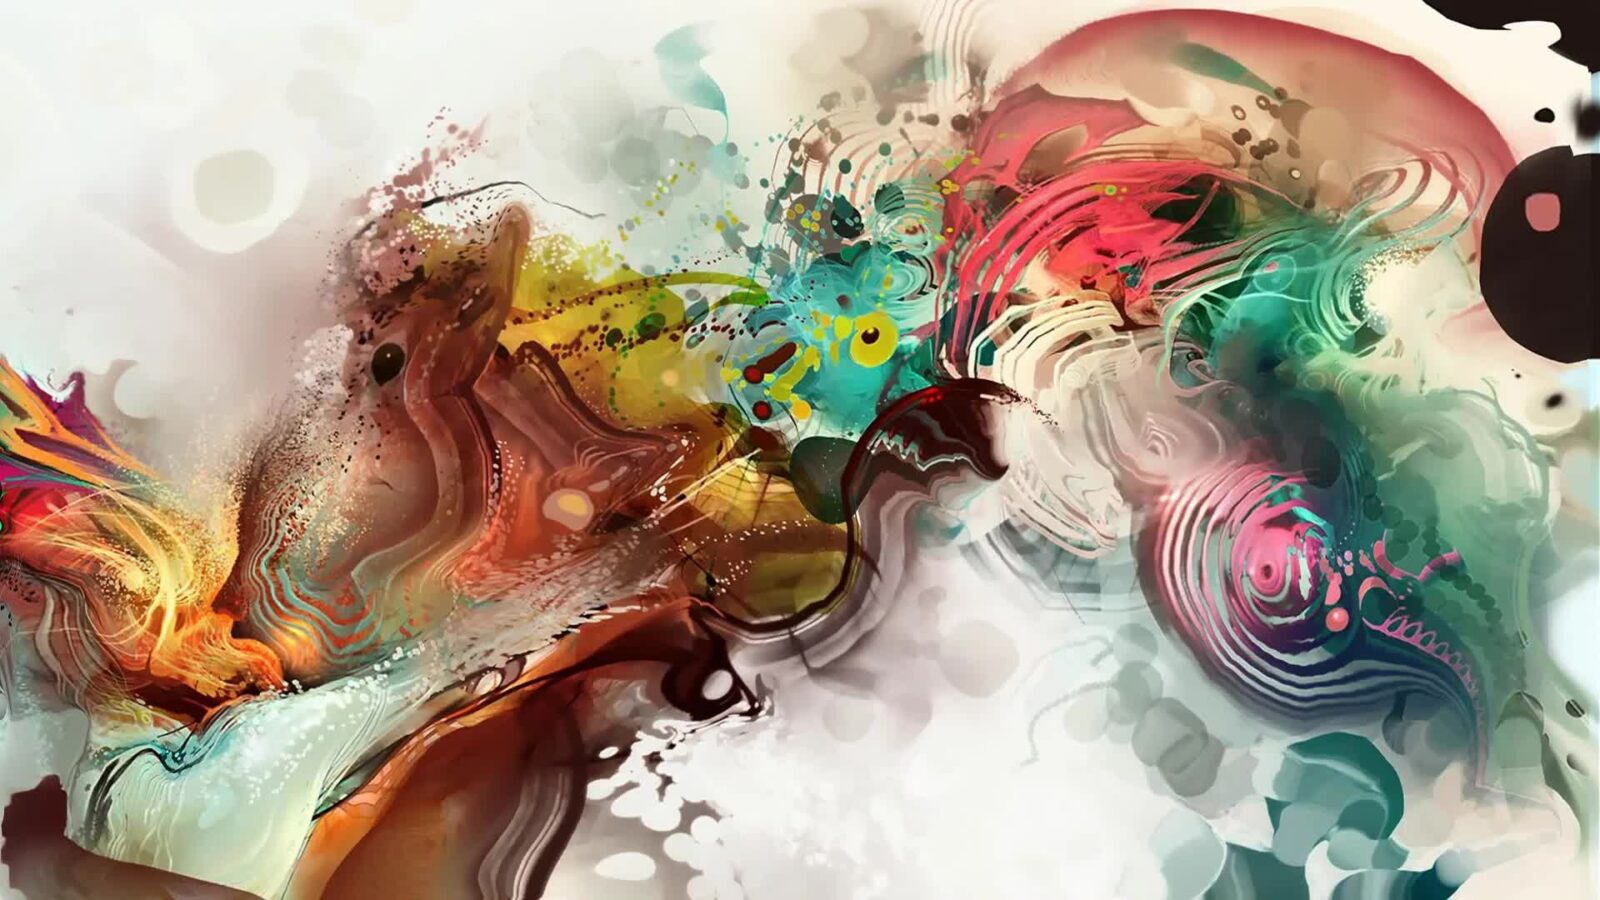 Colors Abstract - Free Live Wallpaper - Live Desktop Wallpapers